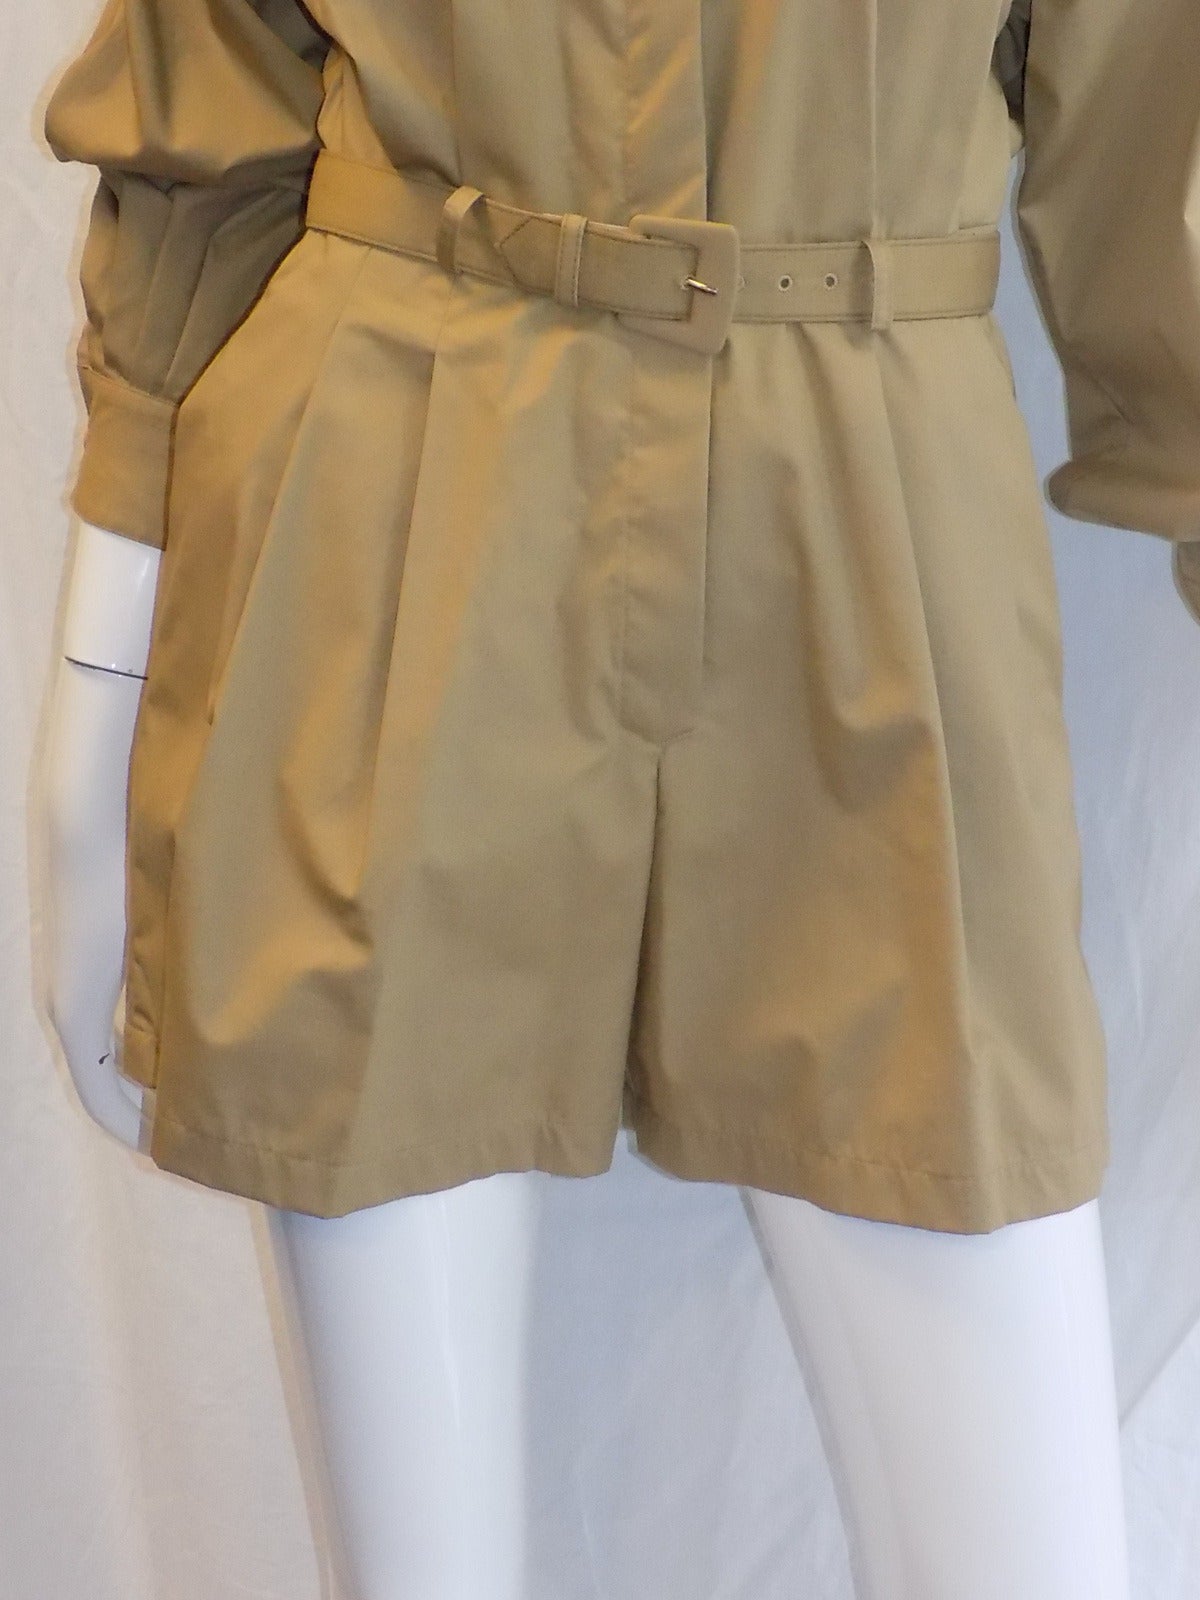 Fabulous pristine OMO Norma Kamali Cotton  Safari shorts Jumper 1980's.
Concealed front button closure boy collar, side pockets , shirt style sleeves, belted. Poplin cotton. Size 6